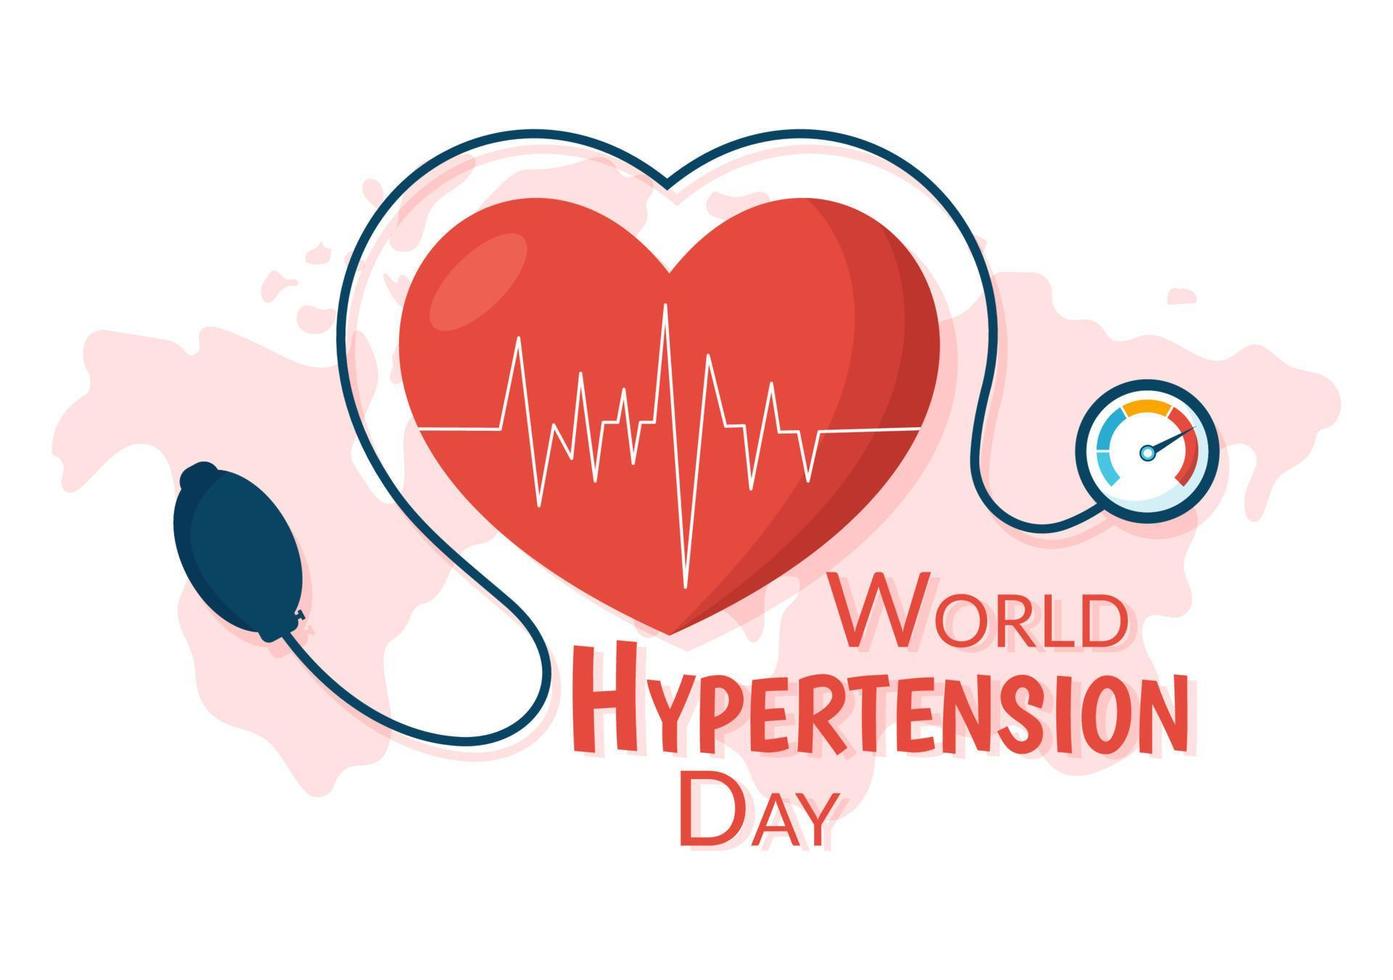 World Hypertension Day on May 17th Illustration with High Blood Pressure and Red Love Image in Flat Cartoon Hand Drawn for Landing Page Templates vector